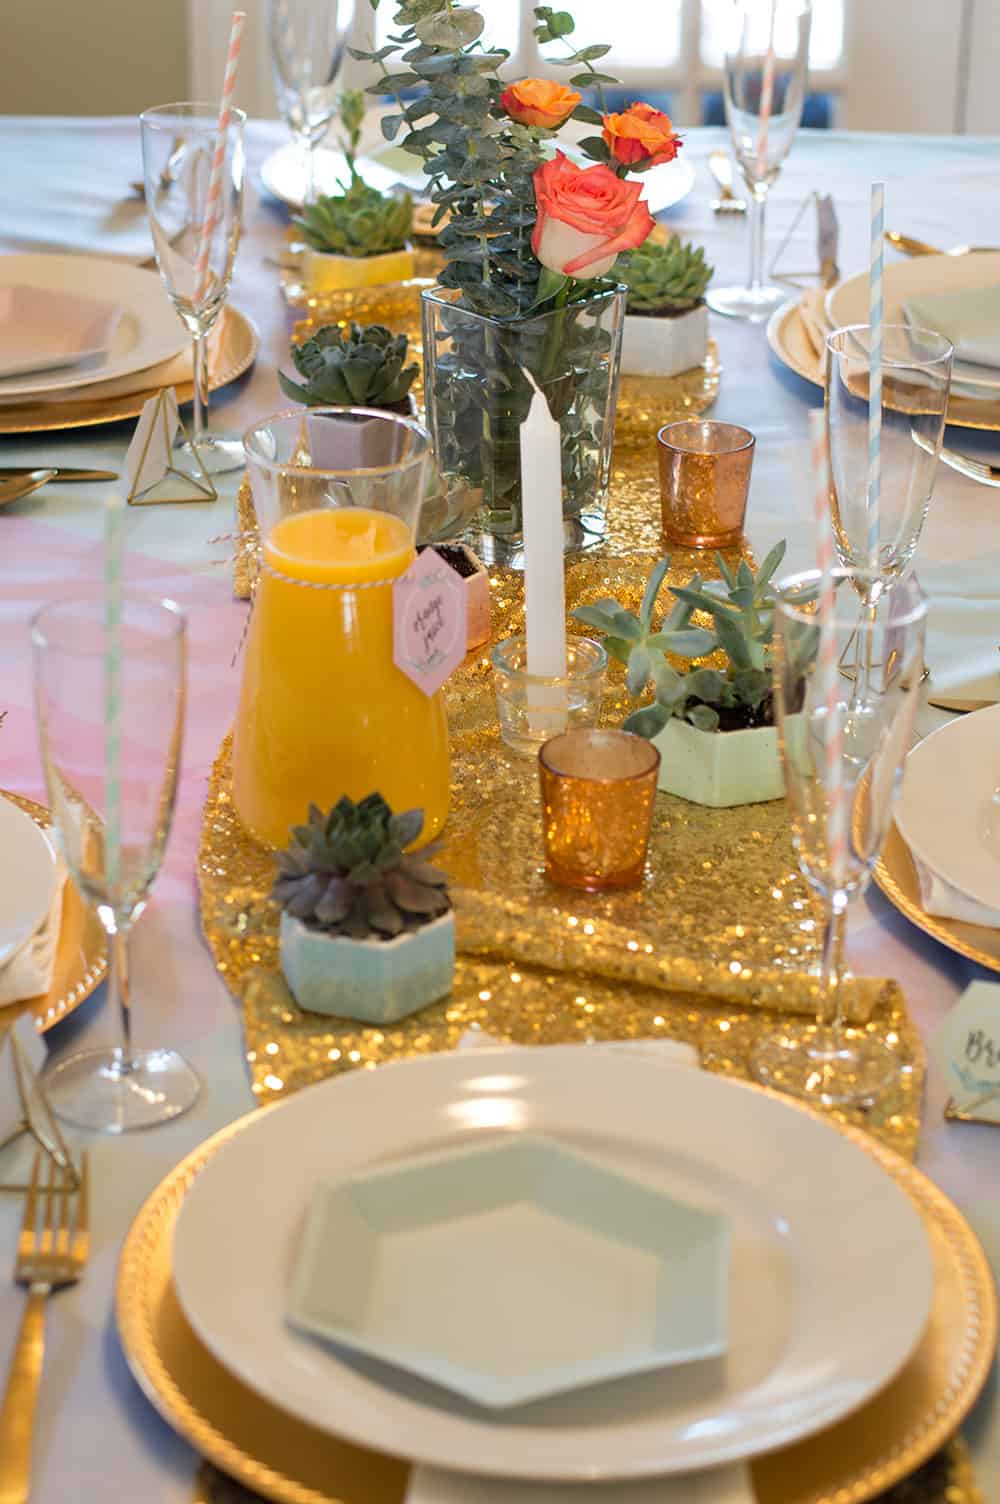 Flowers, succulents, and candles create a simple yet breathtaking centerpieces, especially when layered on top of gold.